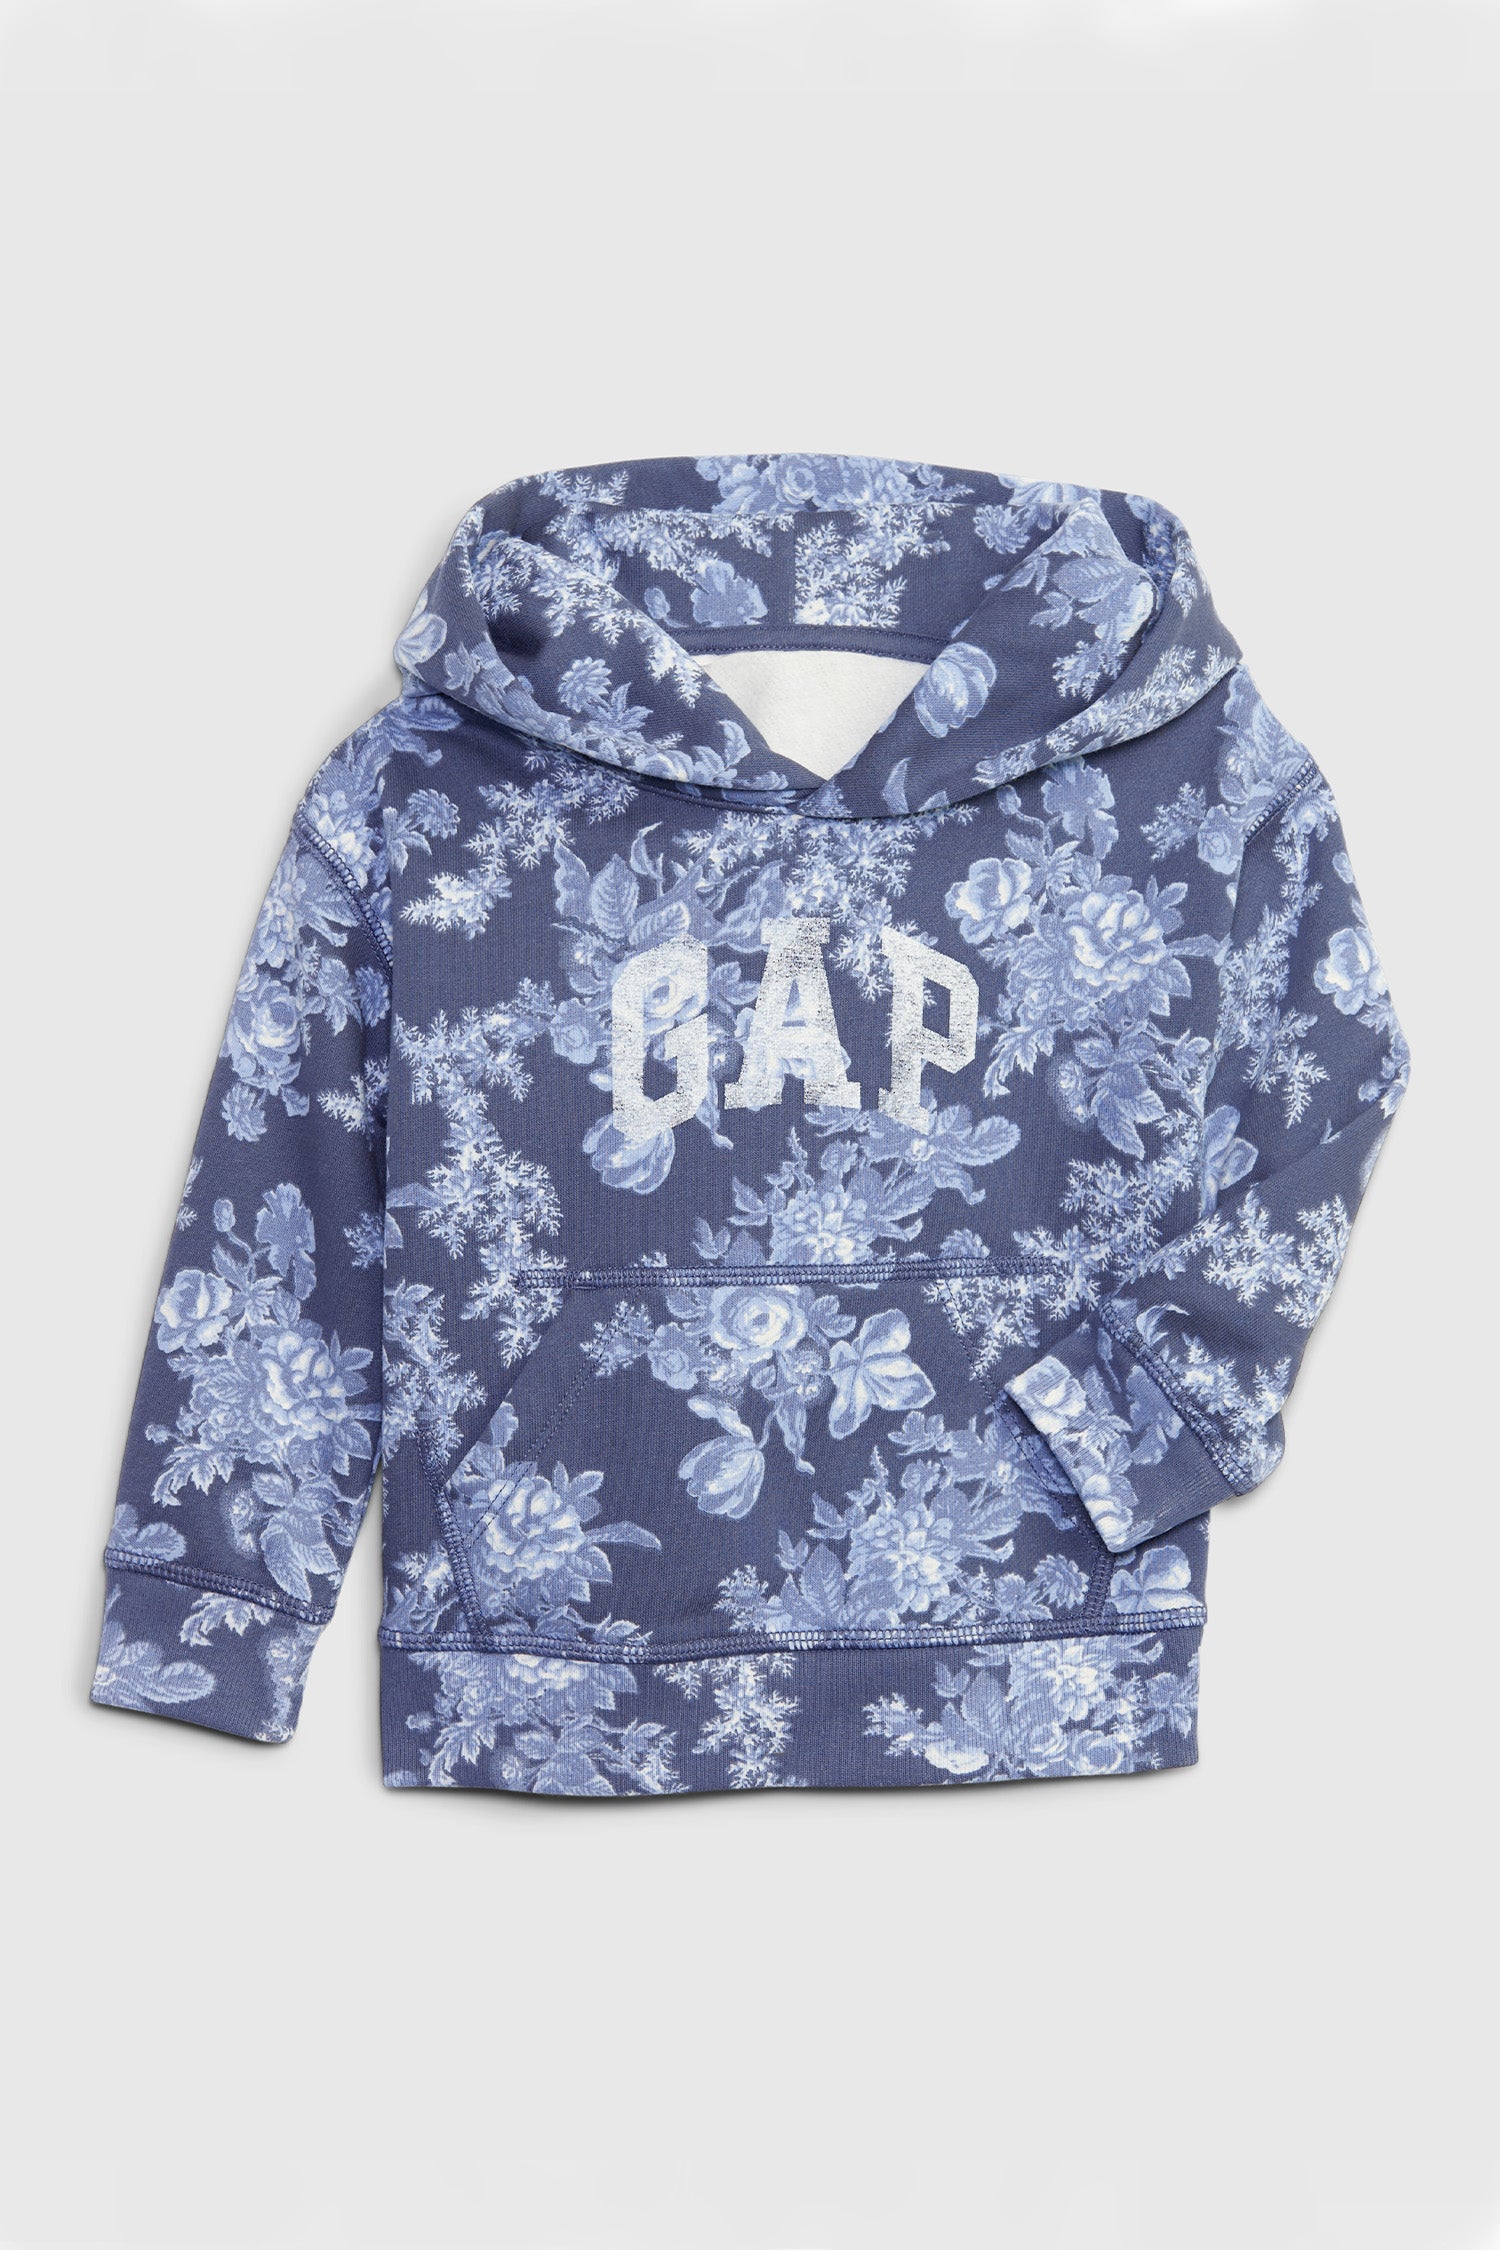 Boy's toddler blue floral hoodie with GAP logo on chest and front pocket. 